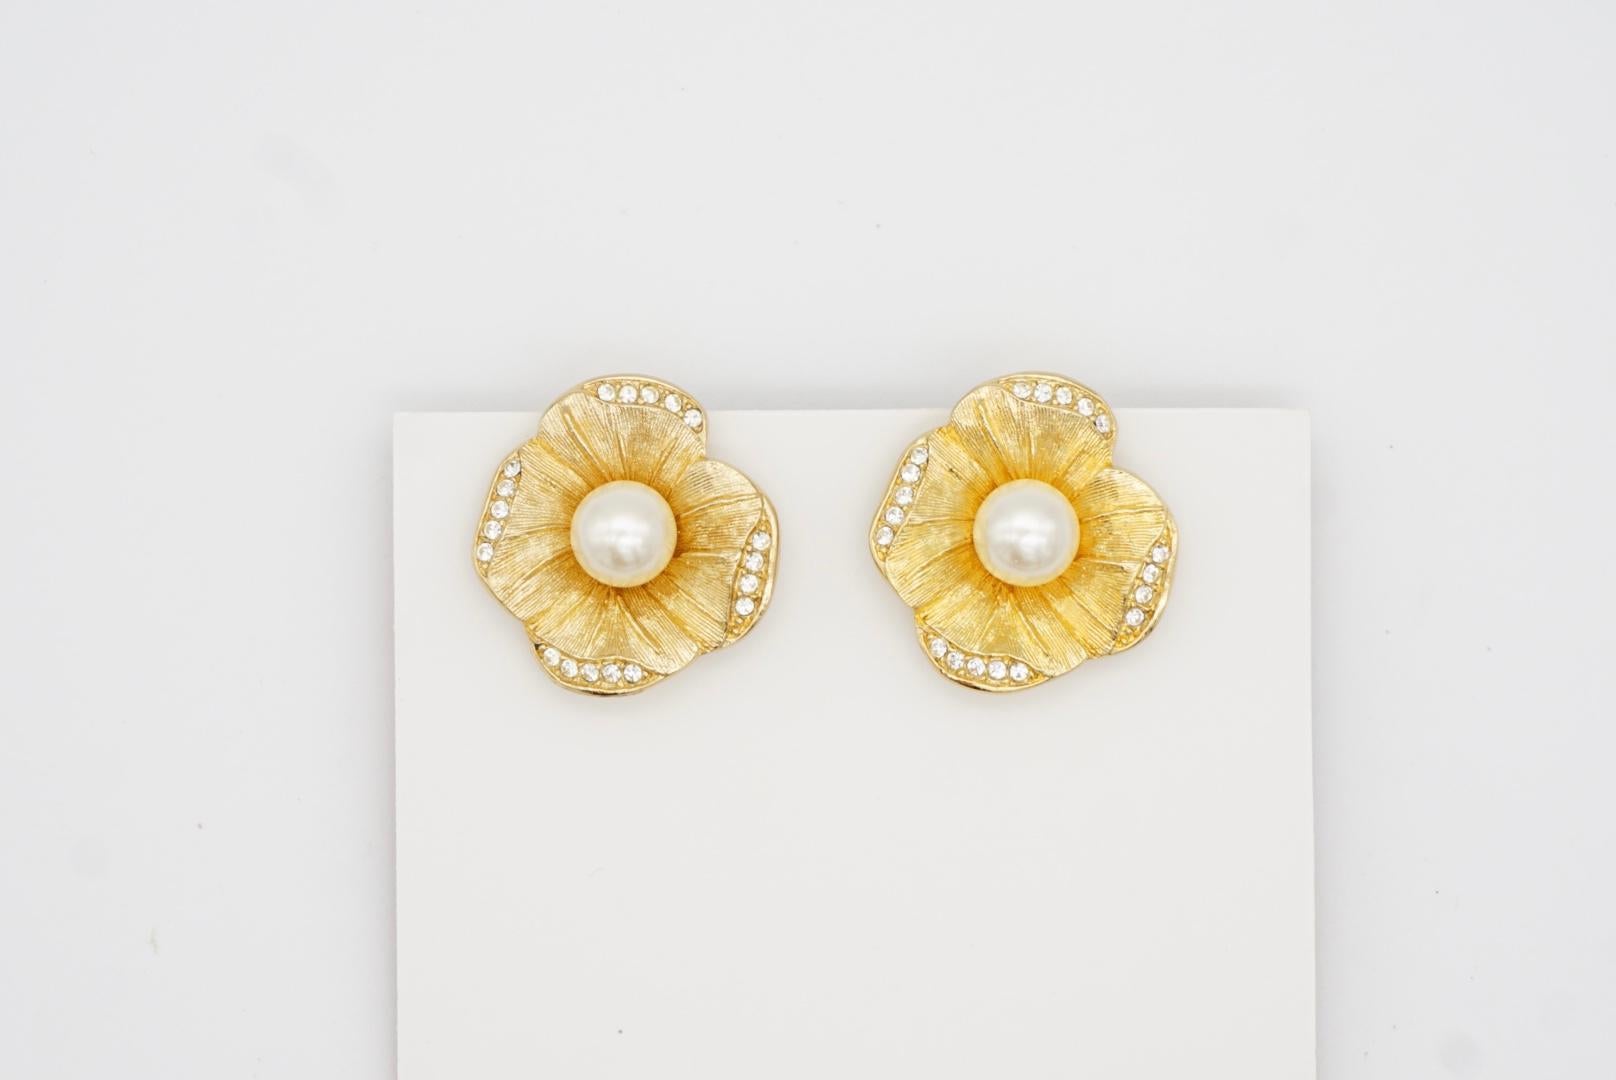 Christian Dior Vintage 1980s Flower White Pearl Crystals Gold Clip On Earrings In Excellent Condition For Sale In Wokingham, England